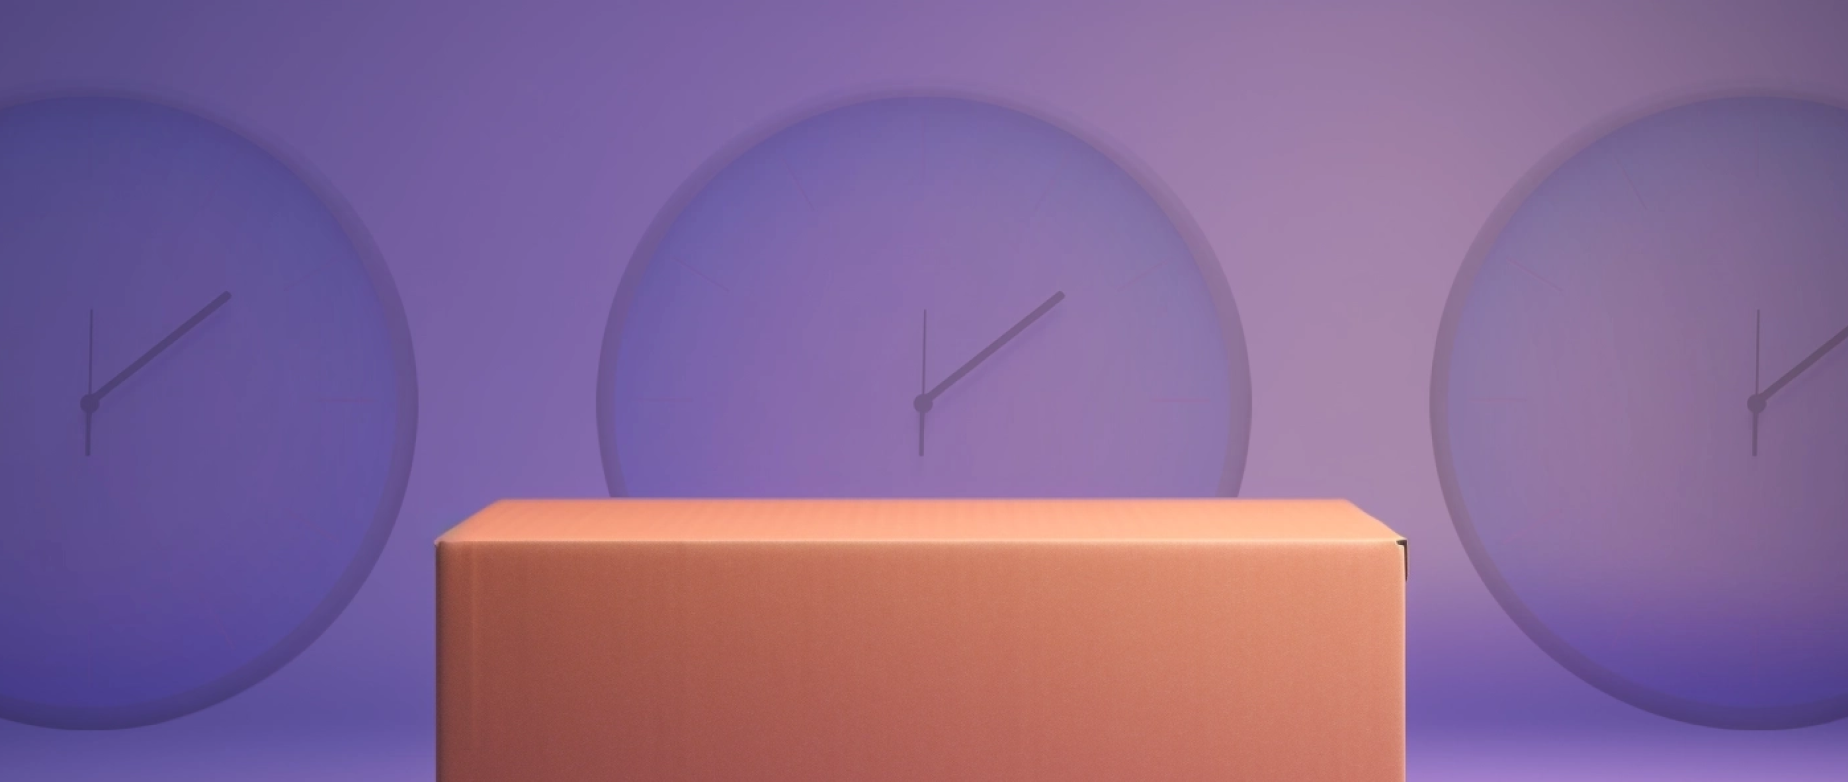 A cardboard box in front of a purple background with three clocks.